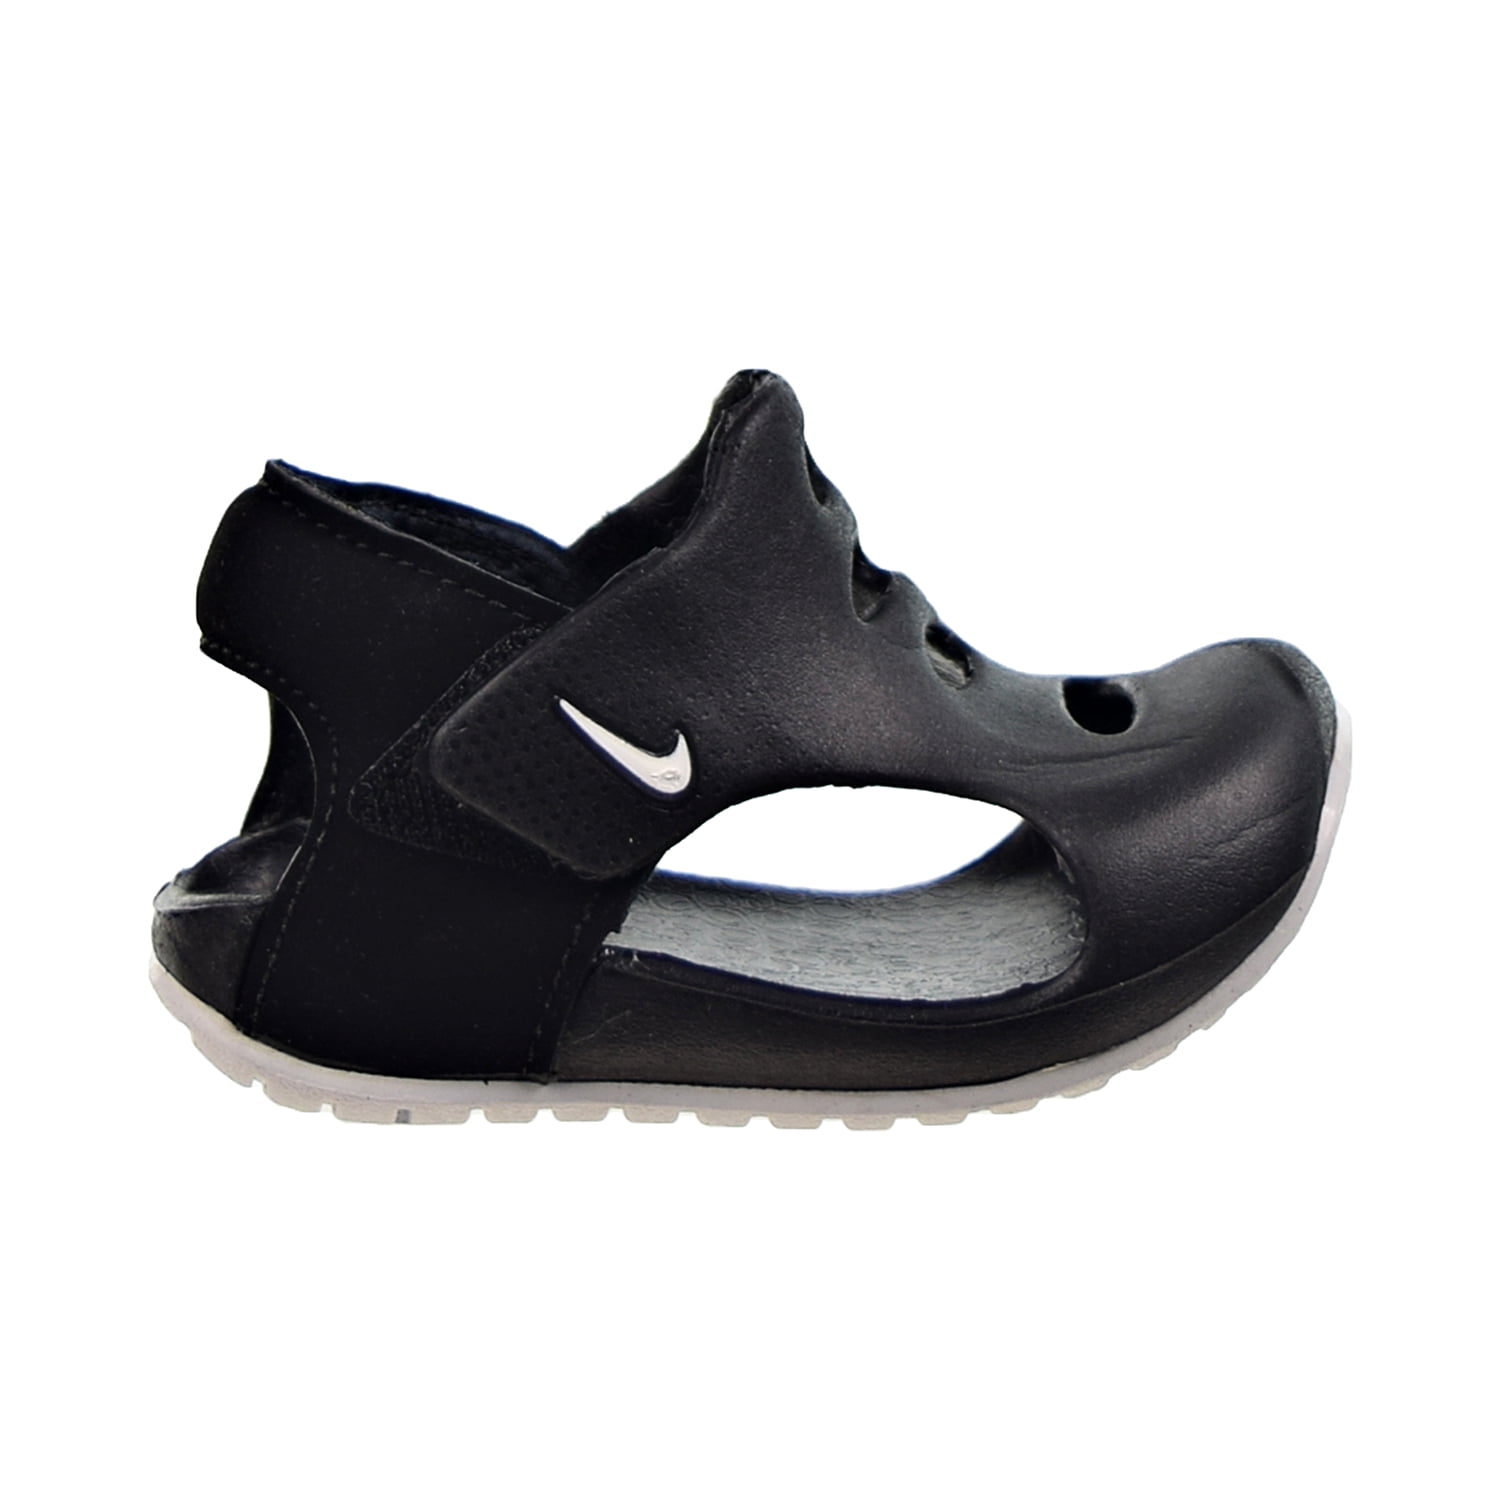 Nike Sunray Protect 3 Toddler's Sandals Black-White dh9465-001 - Walmart.com